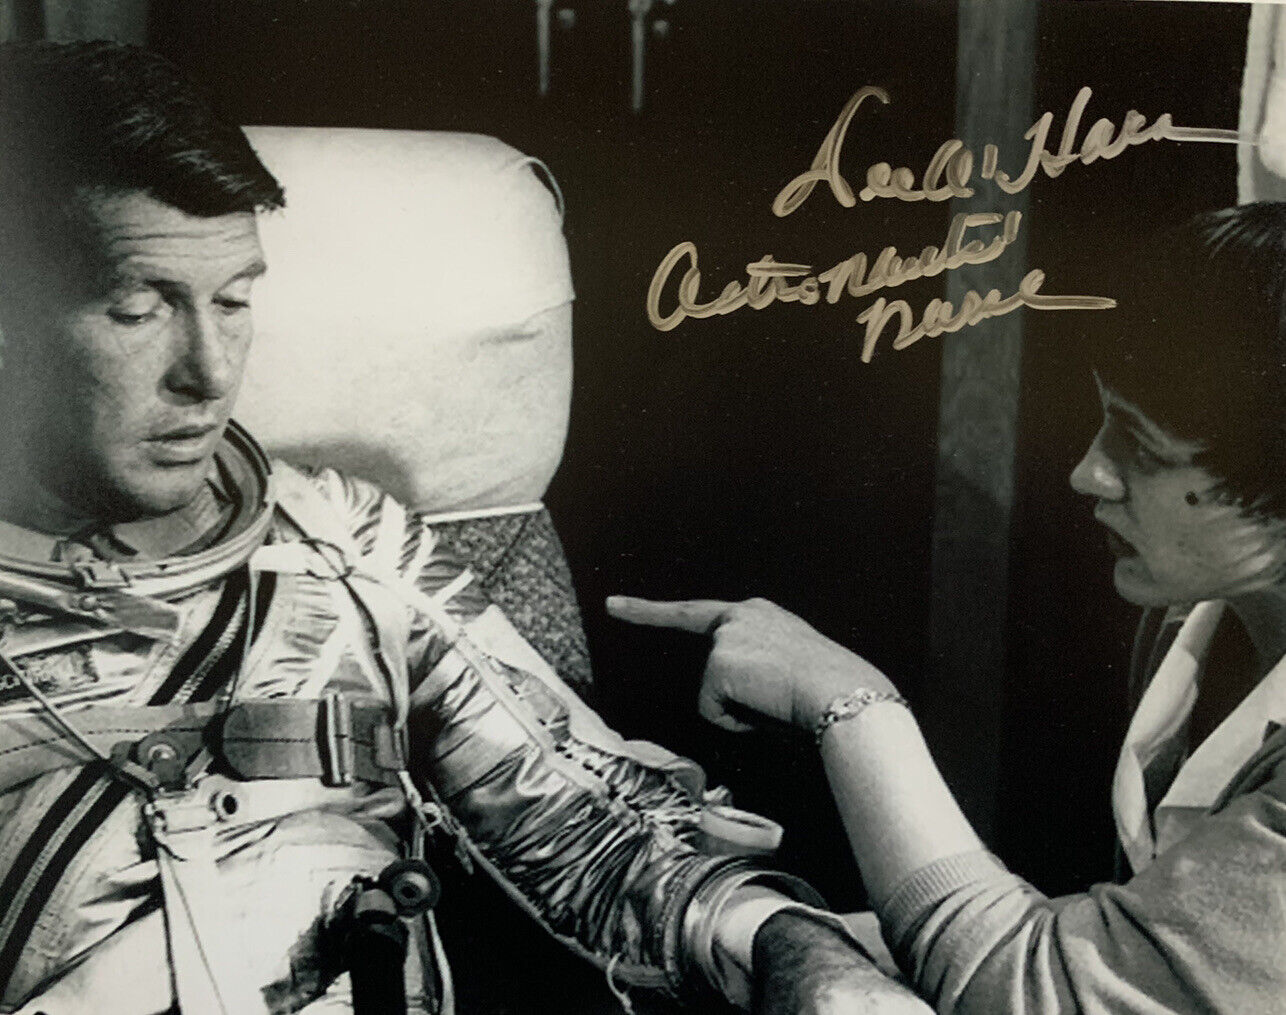 DEE O’HARA HAND SIGNED 8x10 Photo Poster painting FIRST NASA NURSE ASTRONAUT AUTO AUTHENTIC